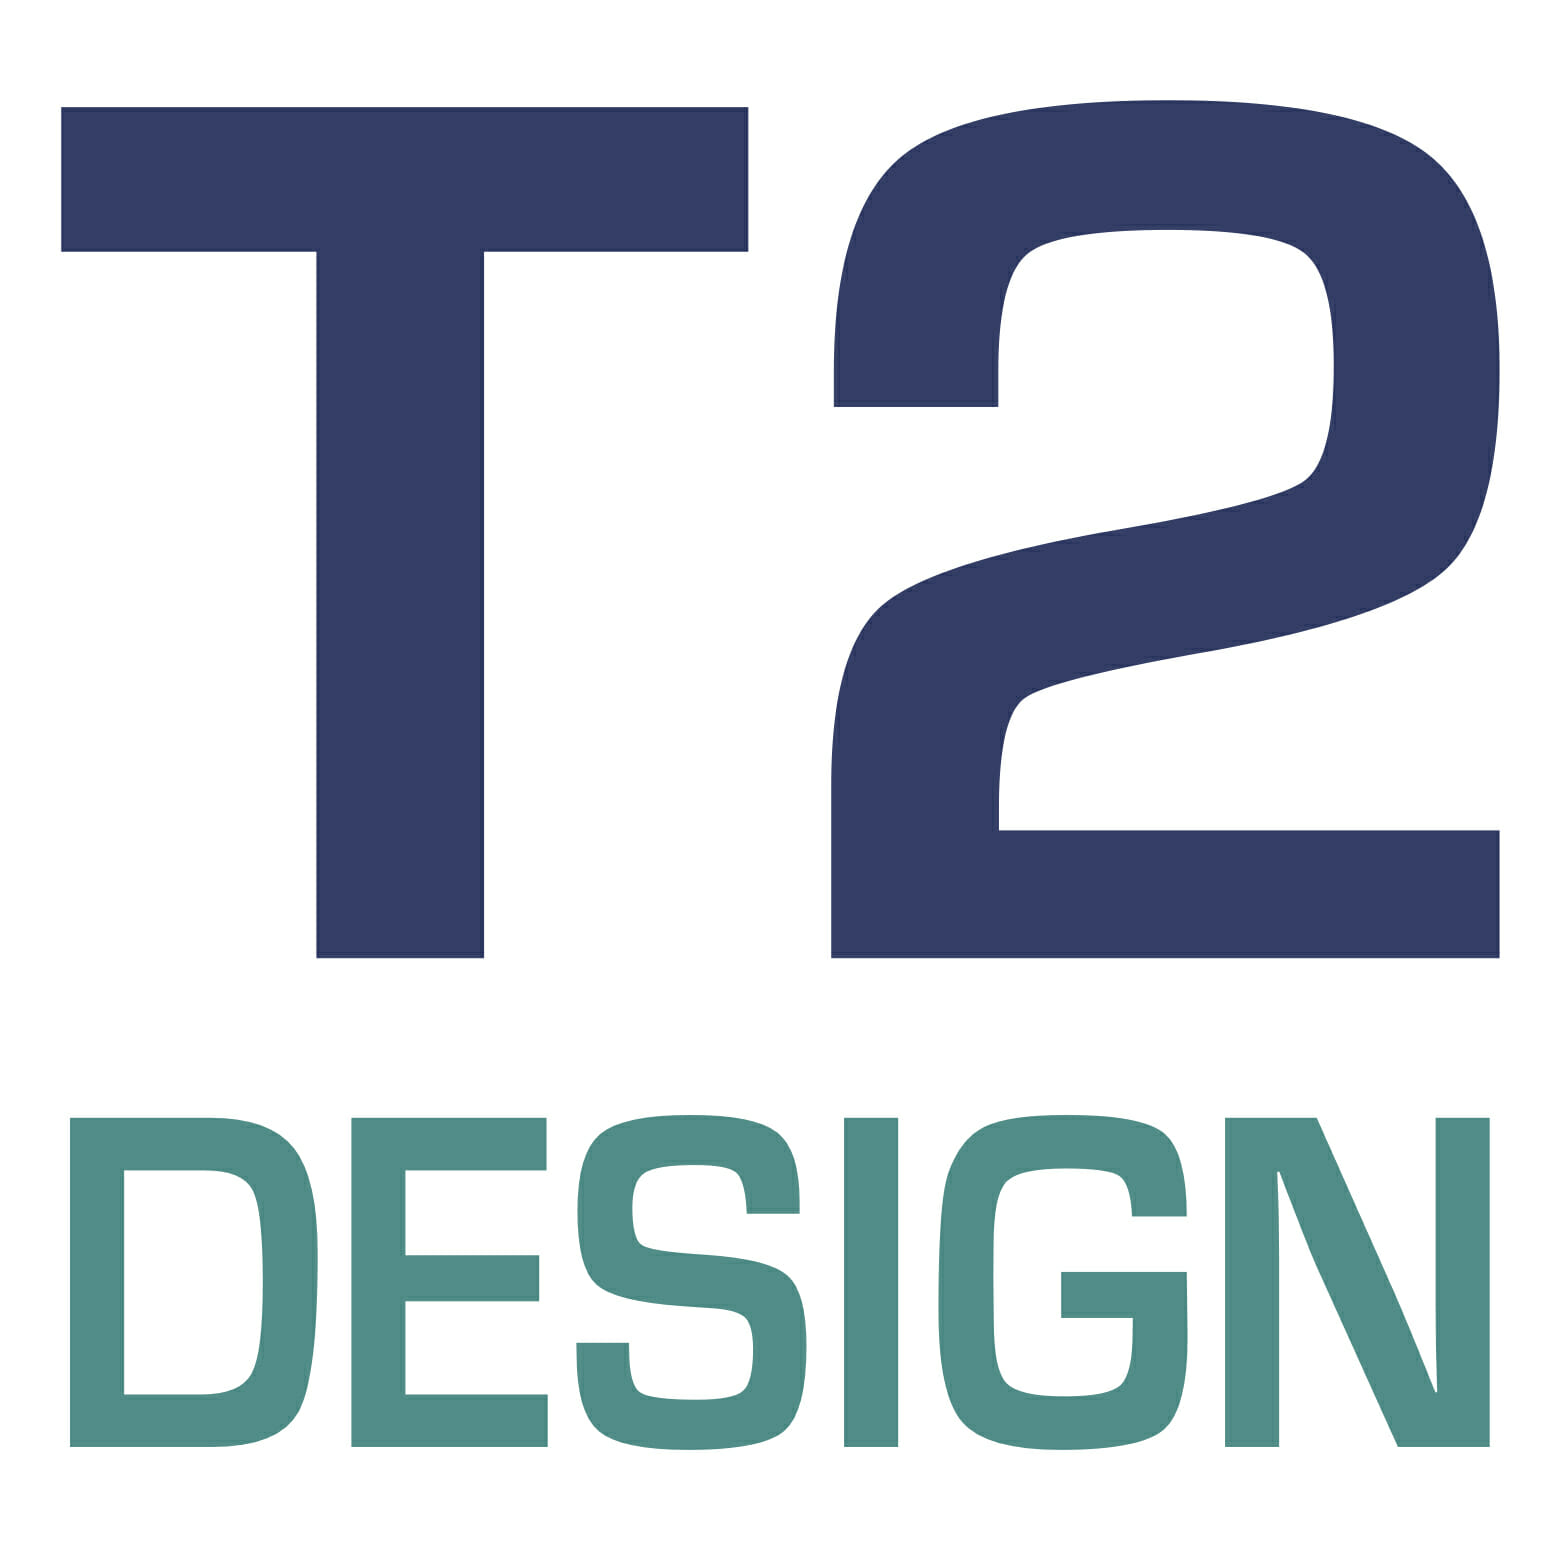 T2 Projects  Photos, videos, logos, illustrations and branding on